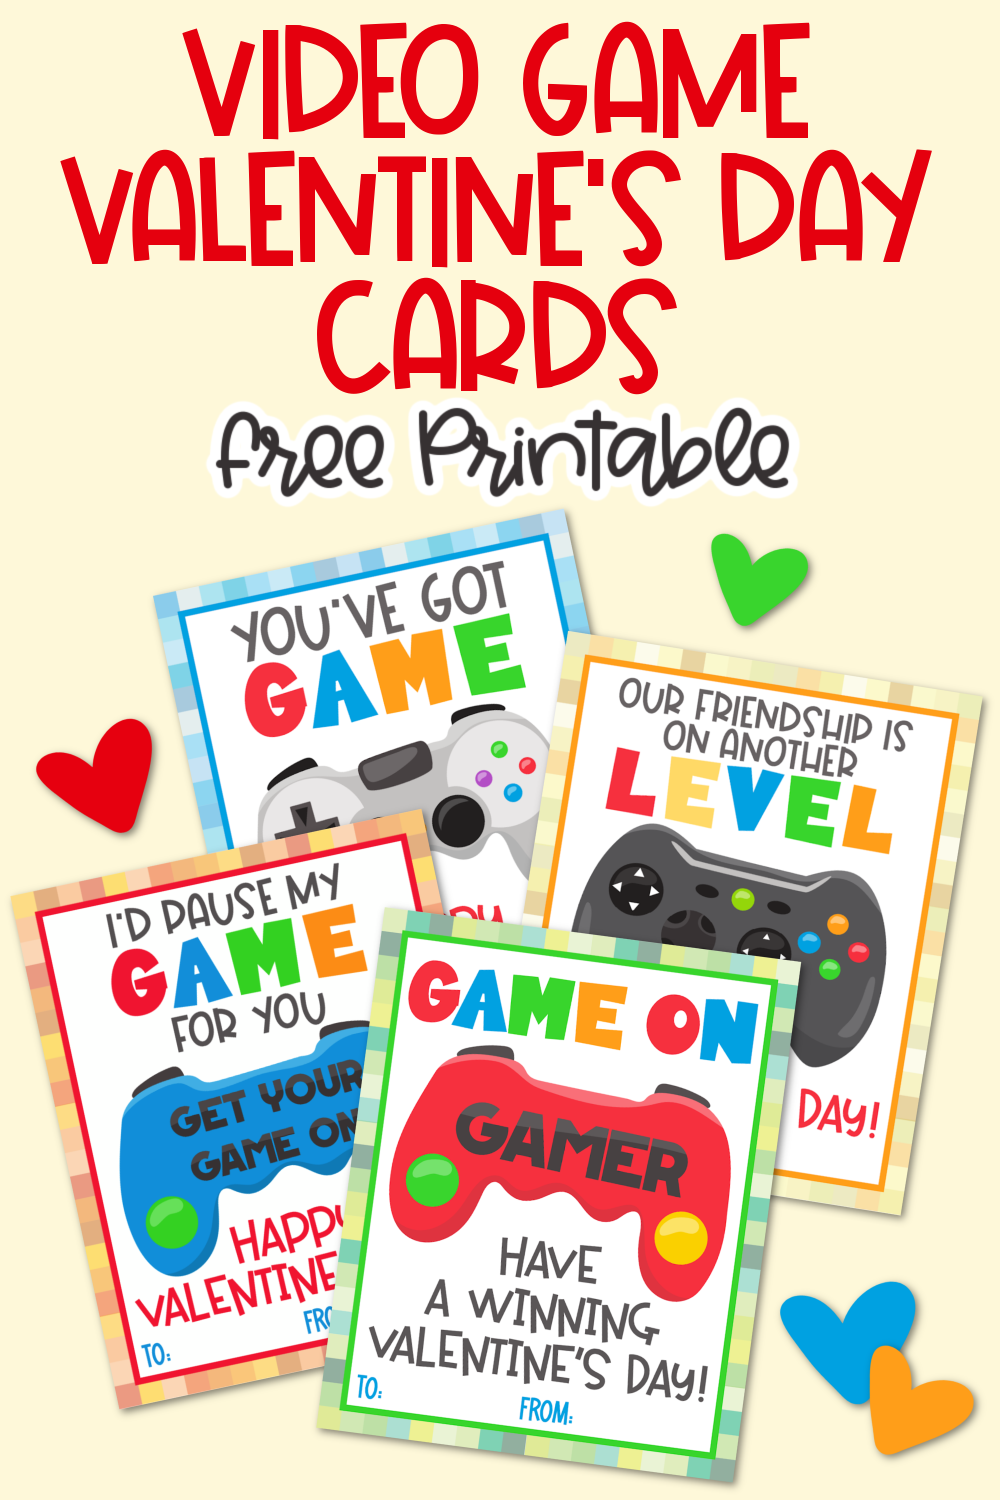 Video Game Valentine's Day Cards Free Printable